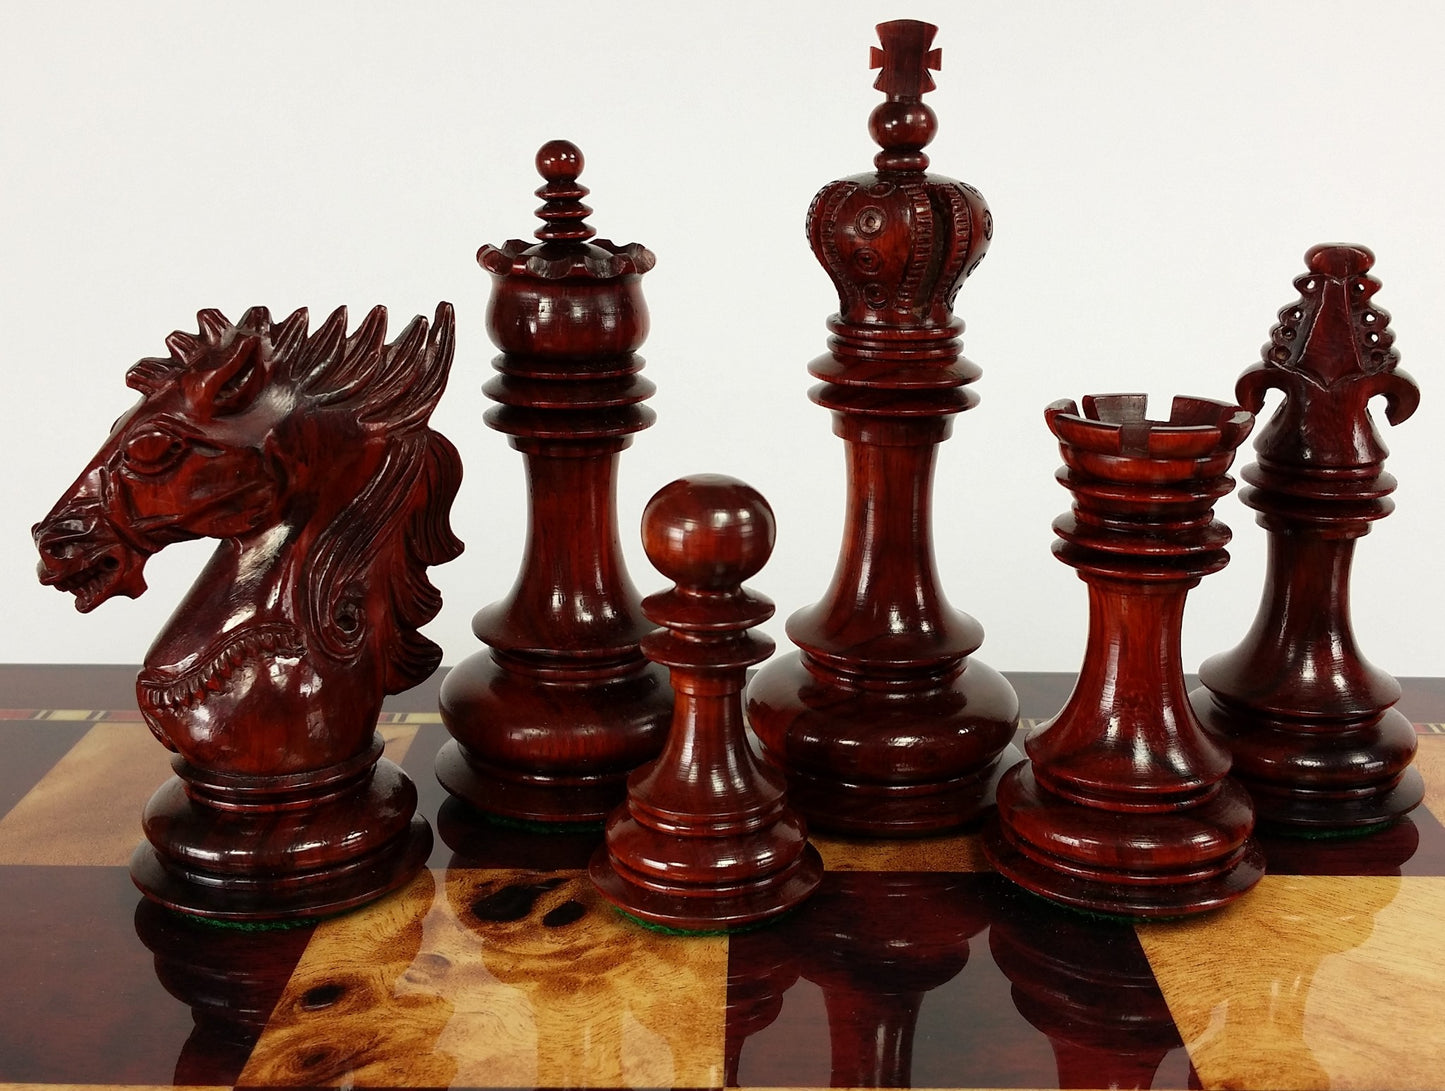 BLOOD ROSEWOOD DRAGON 4 5/8" Large Staunton Chess Set Cherry Color Storage Board